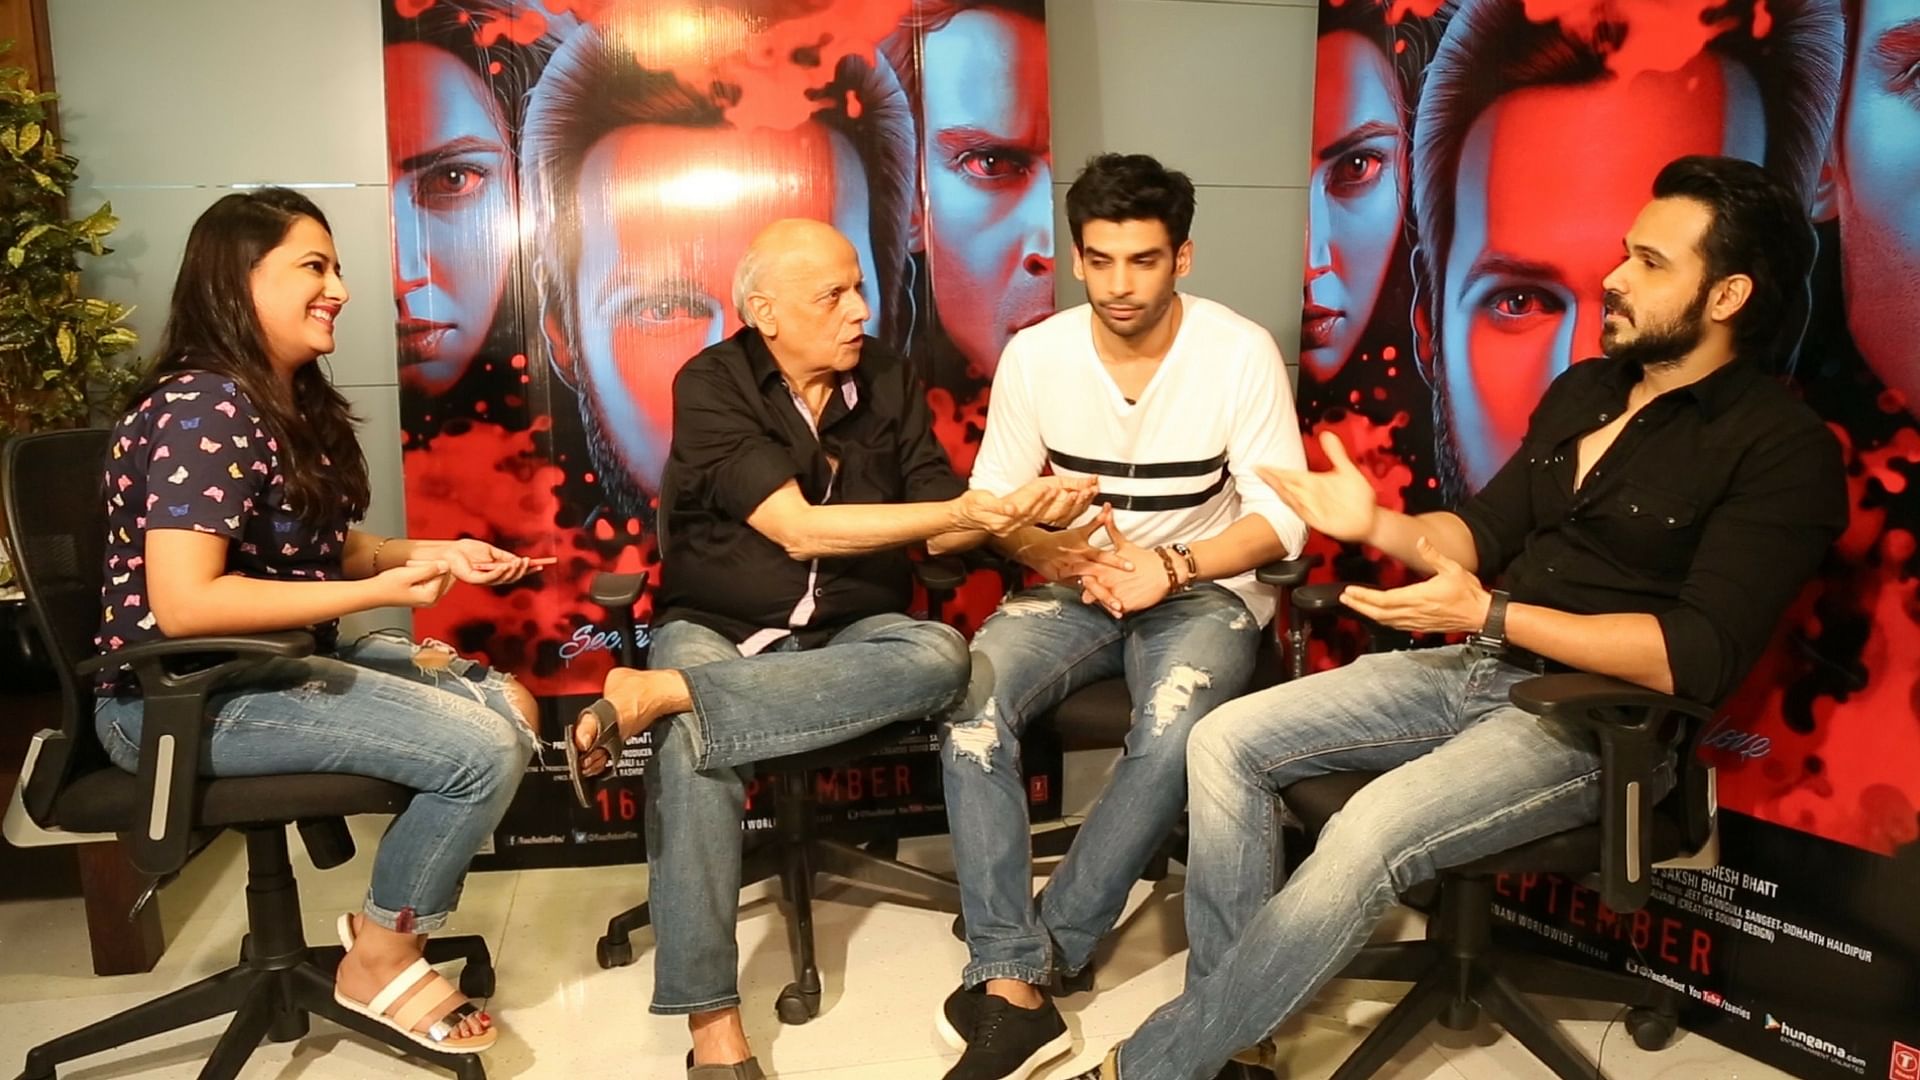 <i>The Quint</i> sits down with Mahesh Bhatt, Gaurav Arora and Emraan Hashmi to know the secret behind the reboot of <i>Raaz. </i>